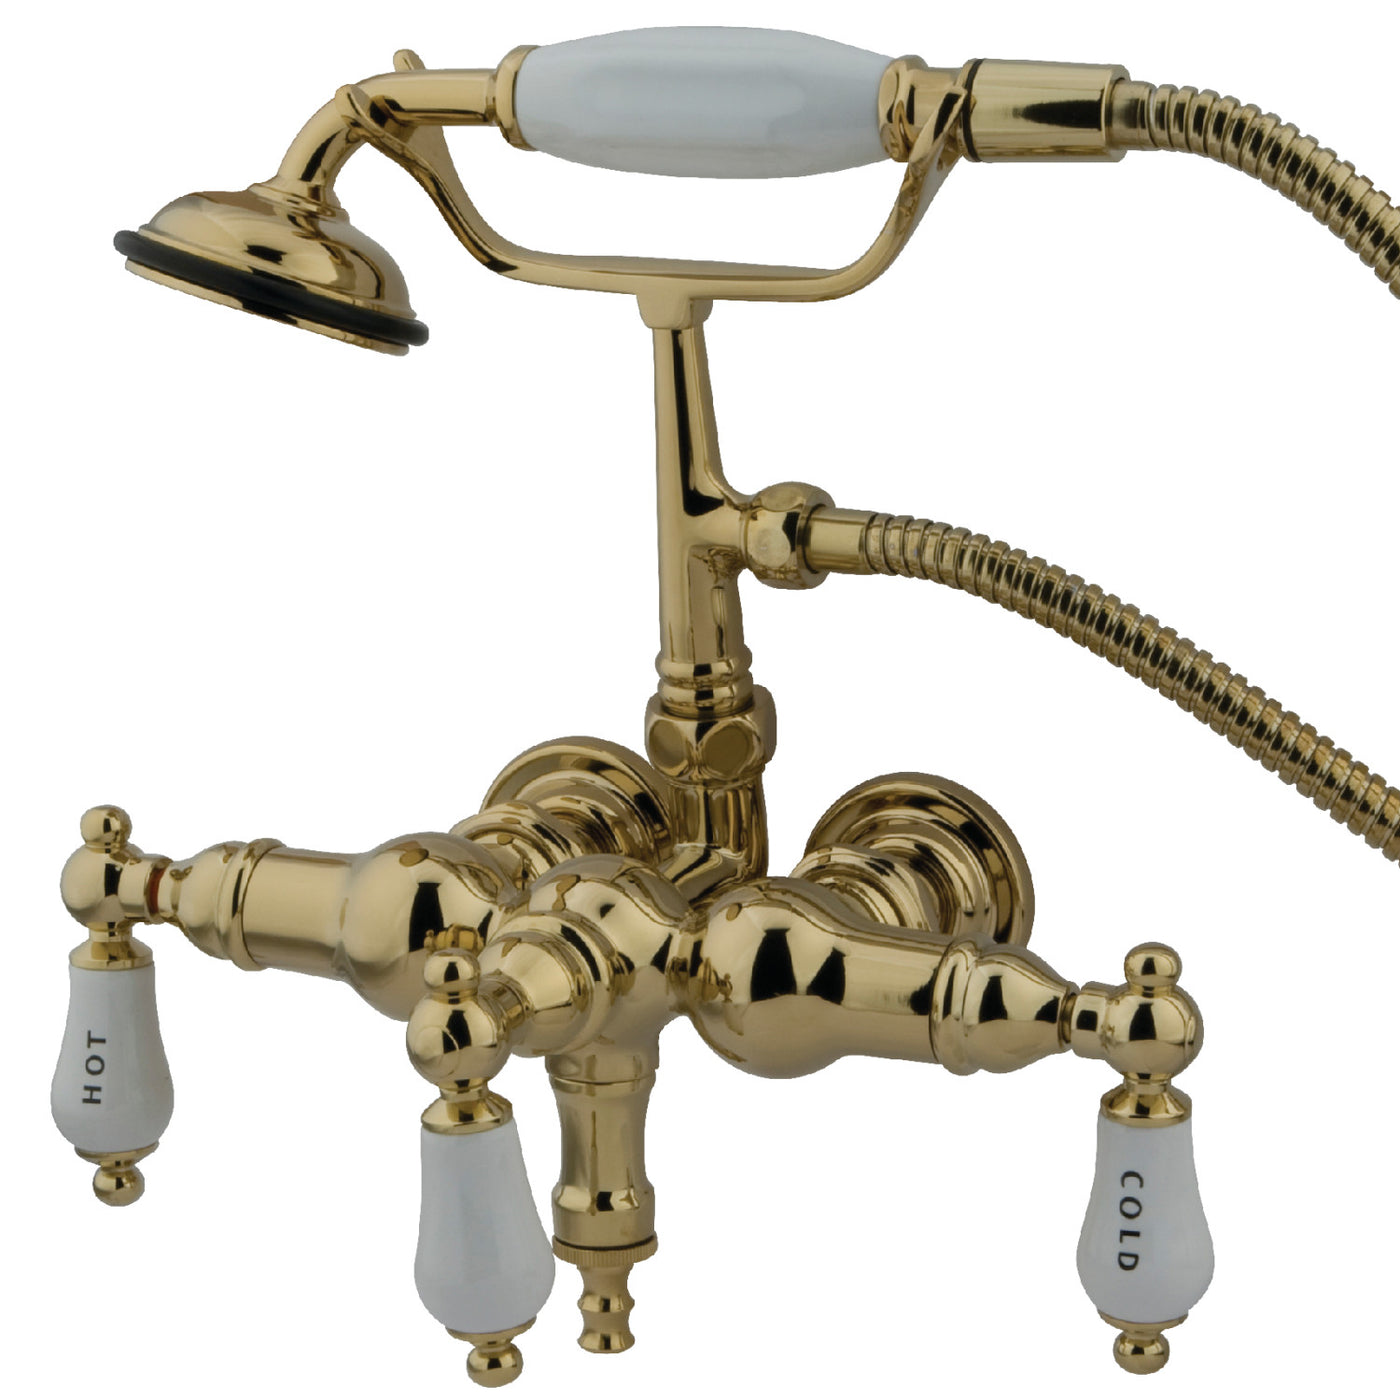 Elements of Design DT0192CL 3-3/8-Inch Wall Mount Tub Faucet with Hand Shower, Polished Brass